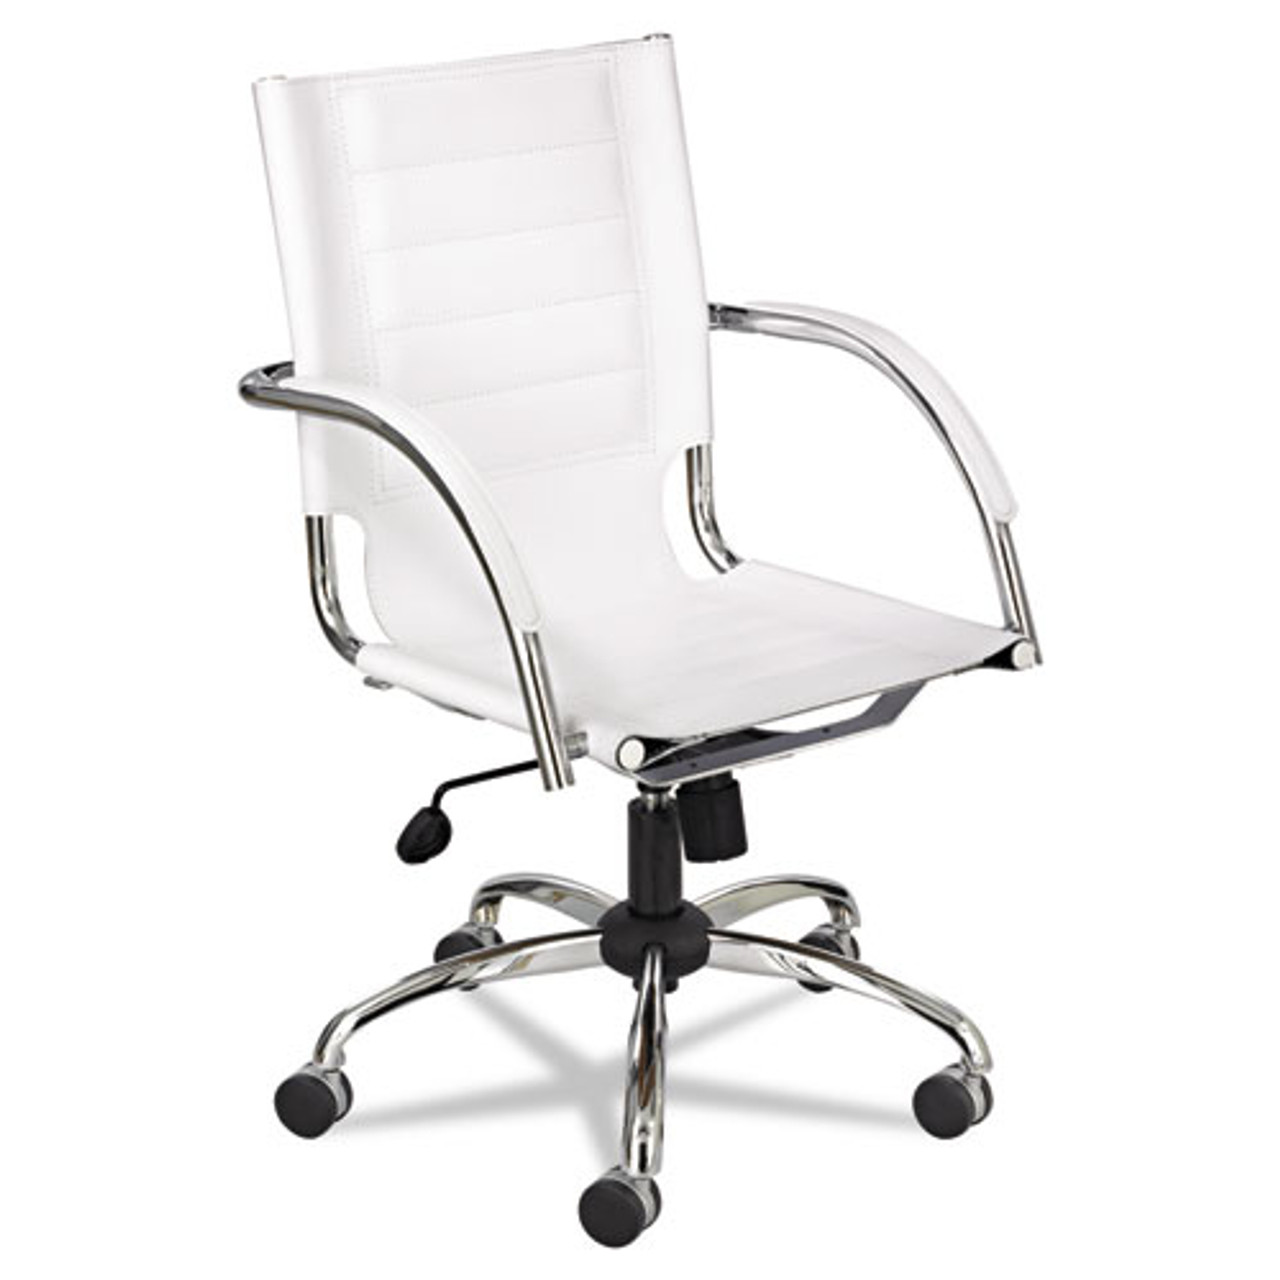 Flaunt Series Mid-Back Manager's Chair, White Leather/chrome, #SF-2345-WH